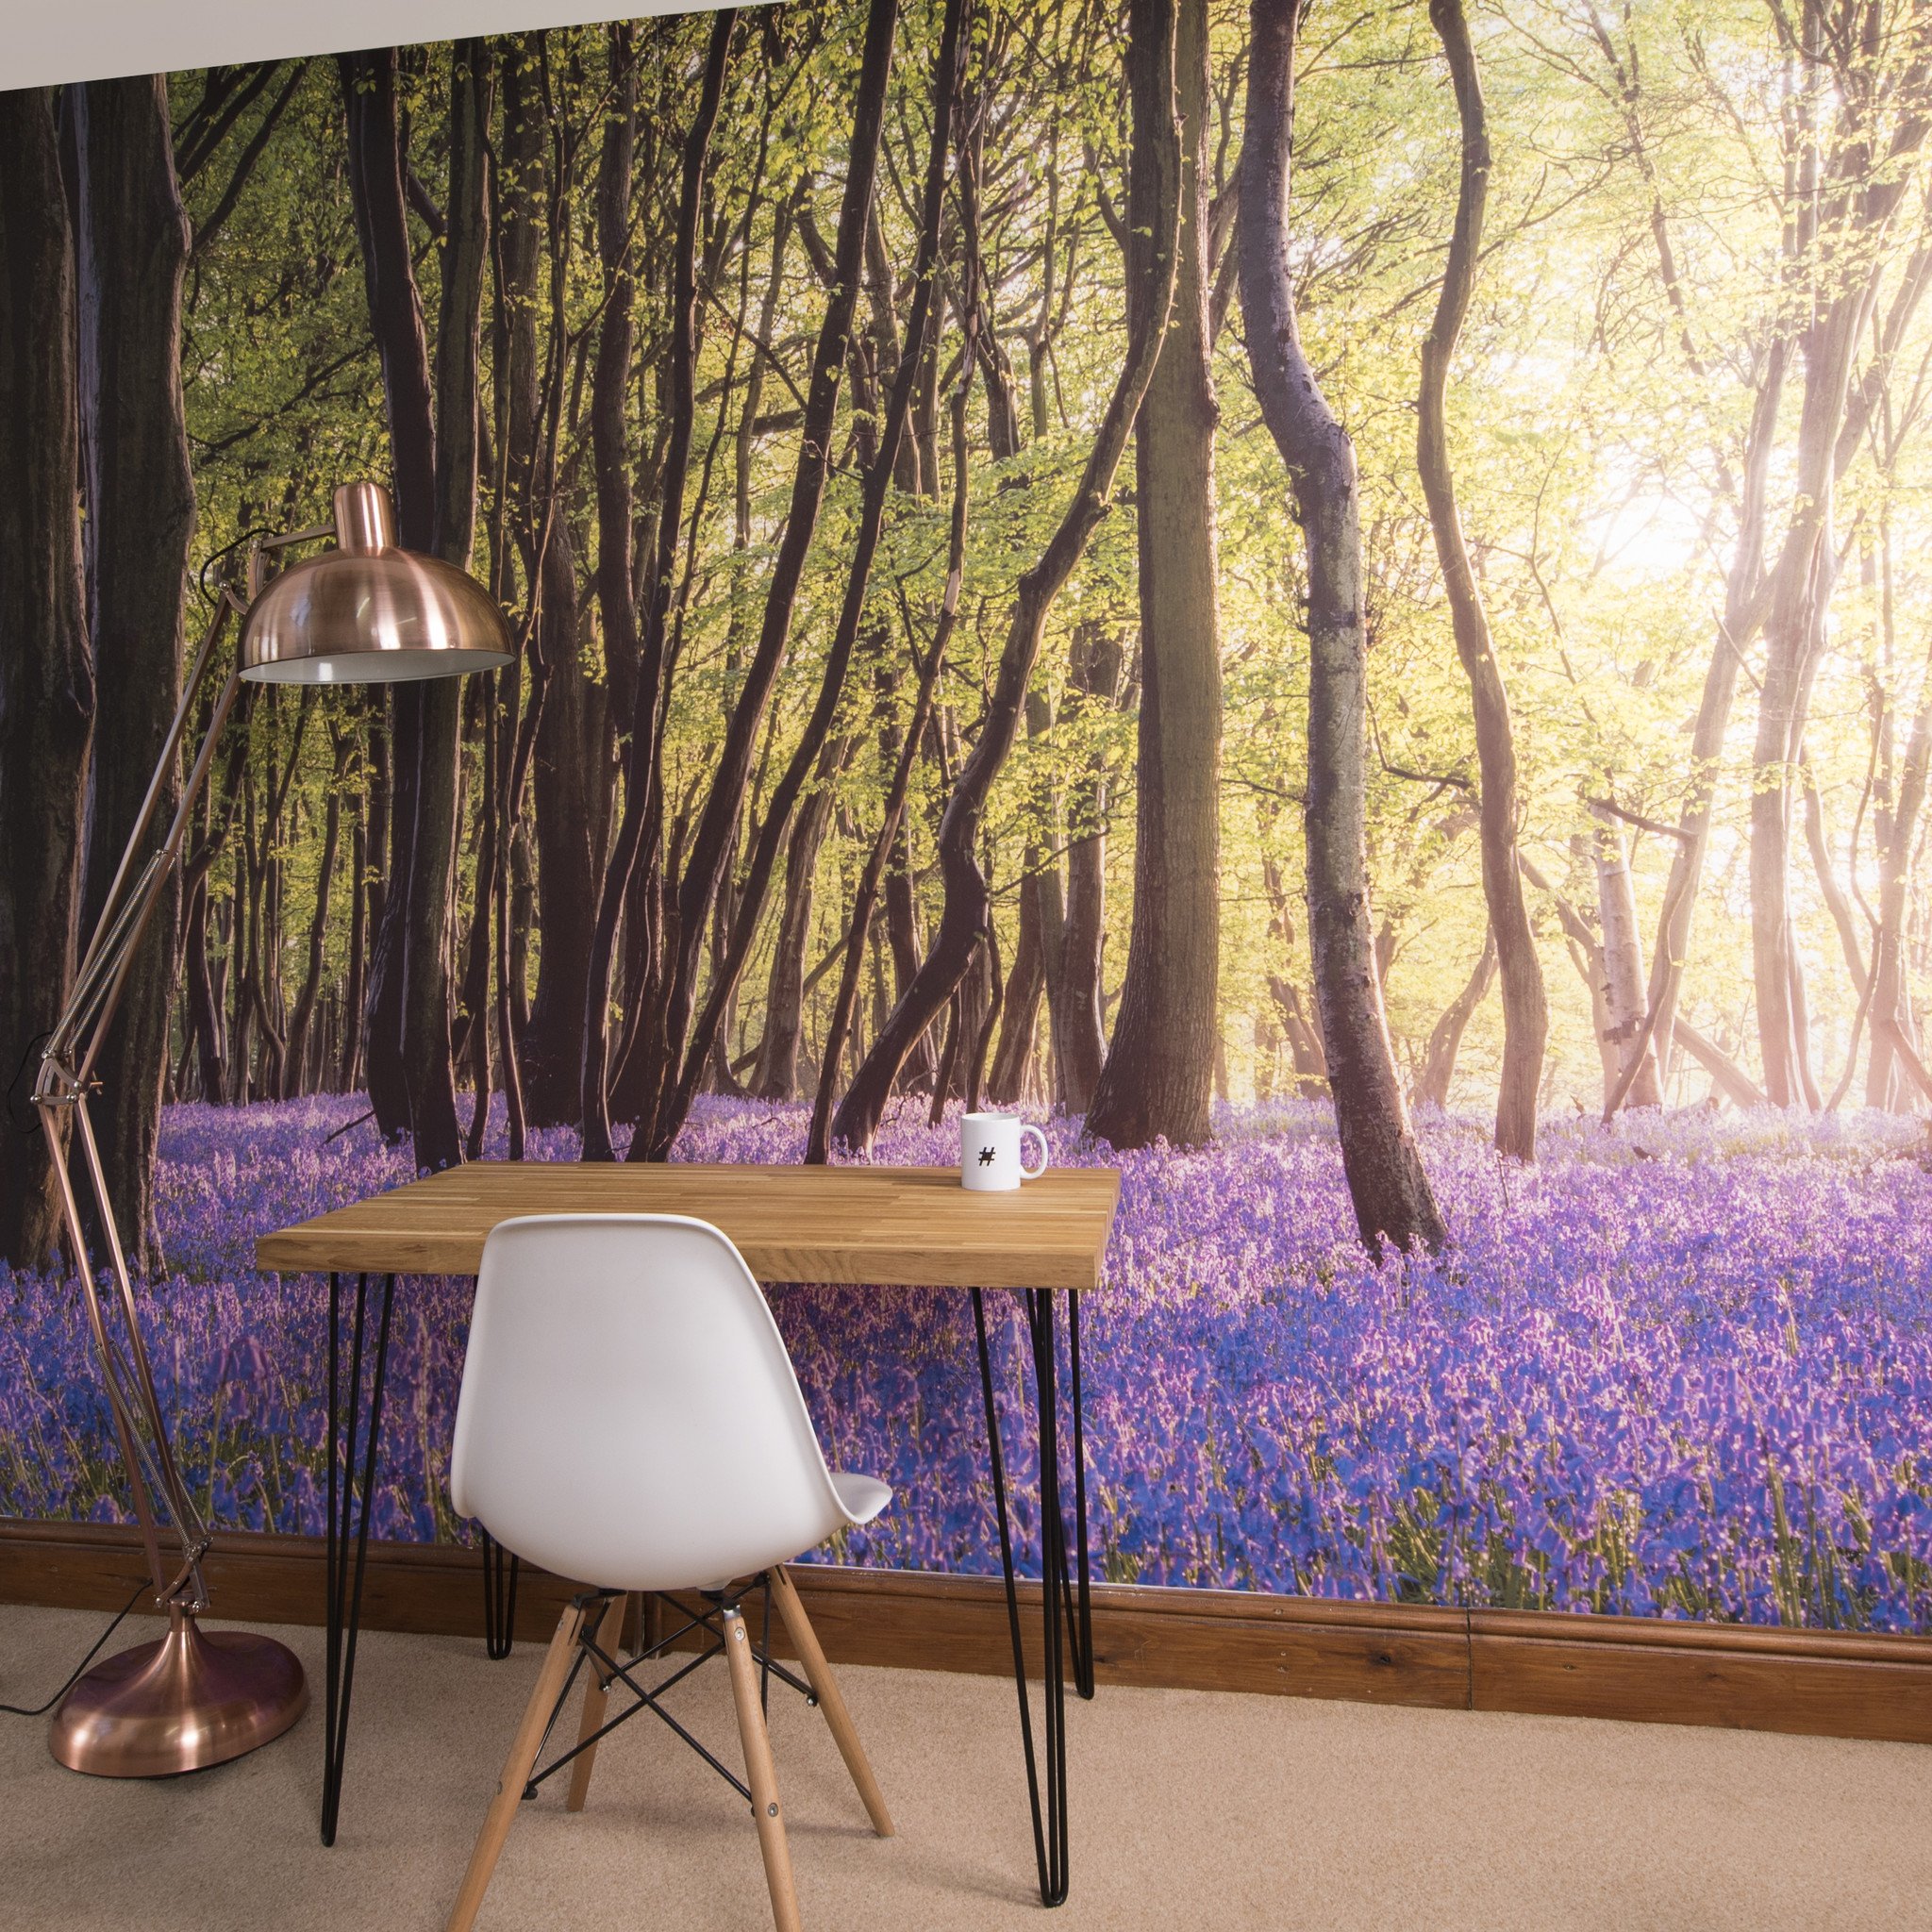 Awesome Self Adhesive Wallpaper Bluebell Wood Mural - Bluebell Wood Wall Mural - HD Wallpaper 